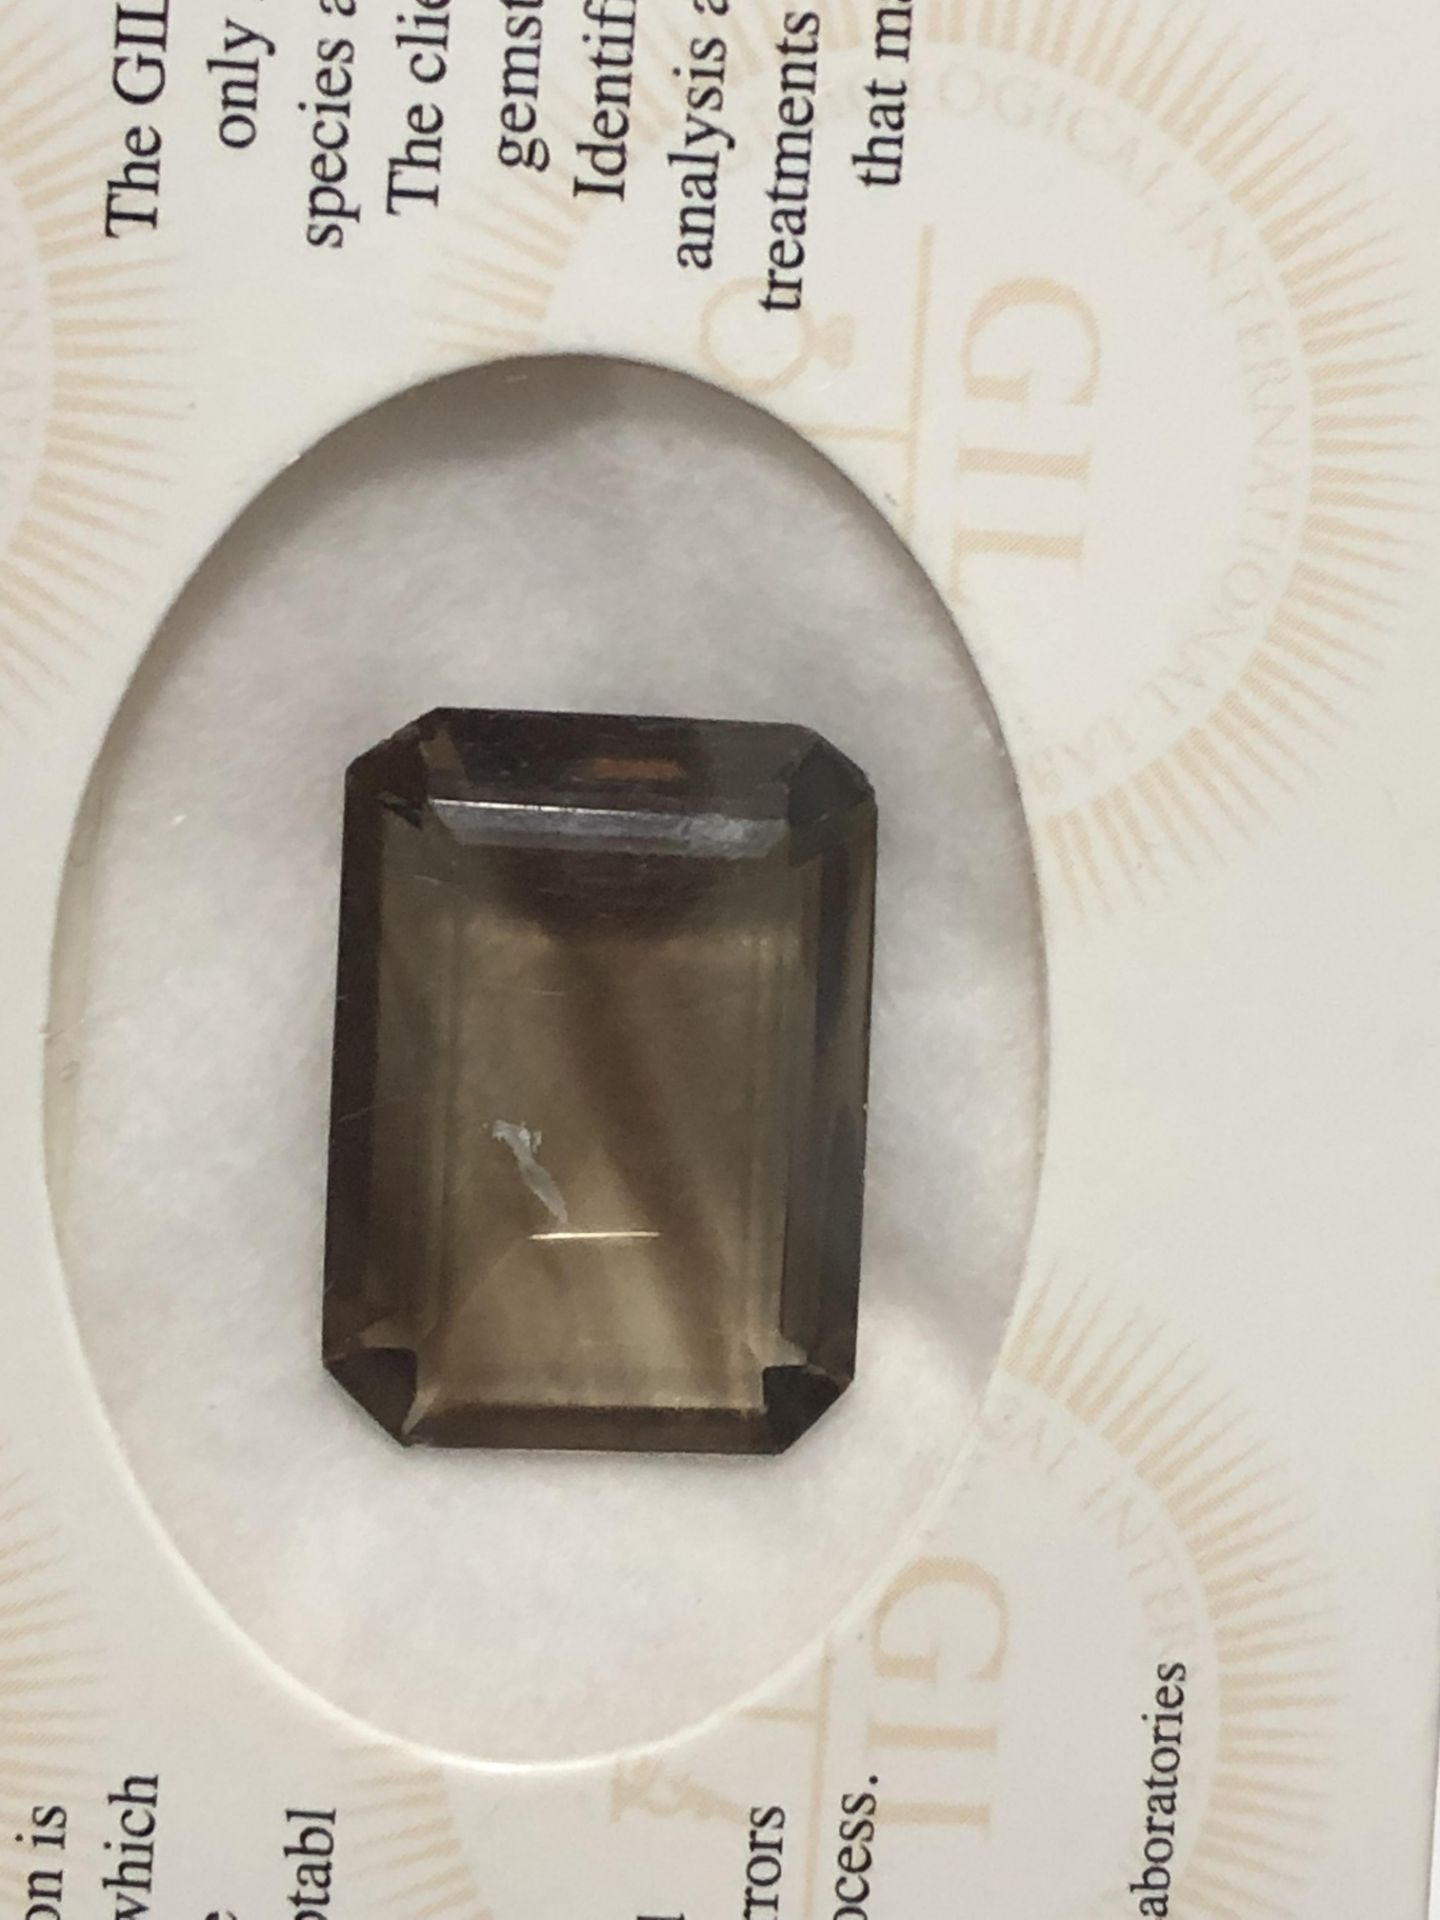 17.52ct Natural Quartz with GIL Certificate - Image 4 of 6